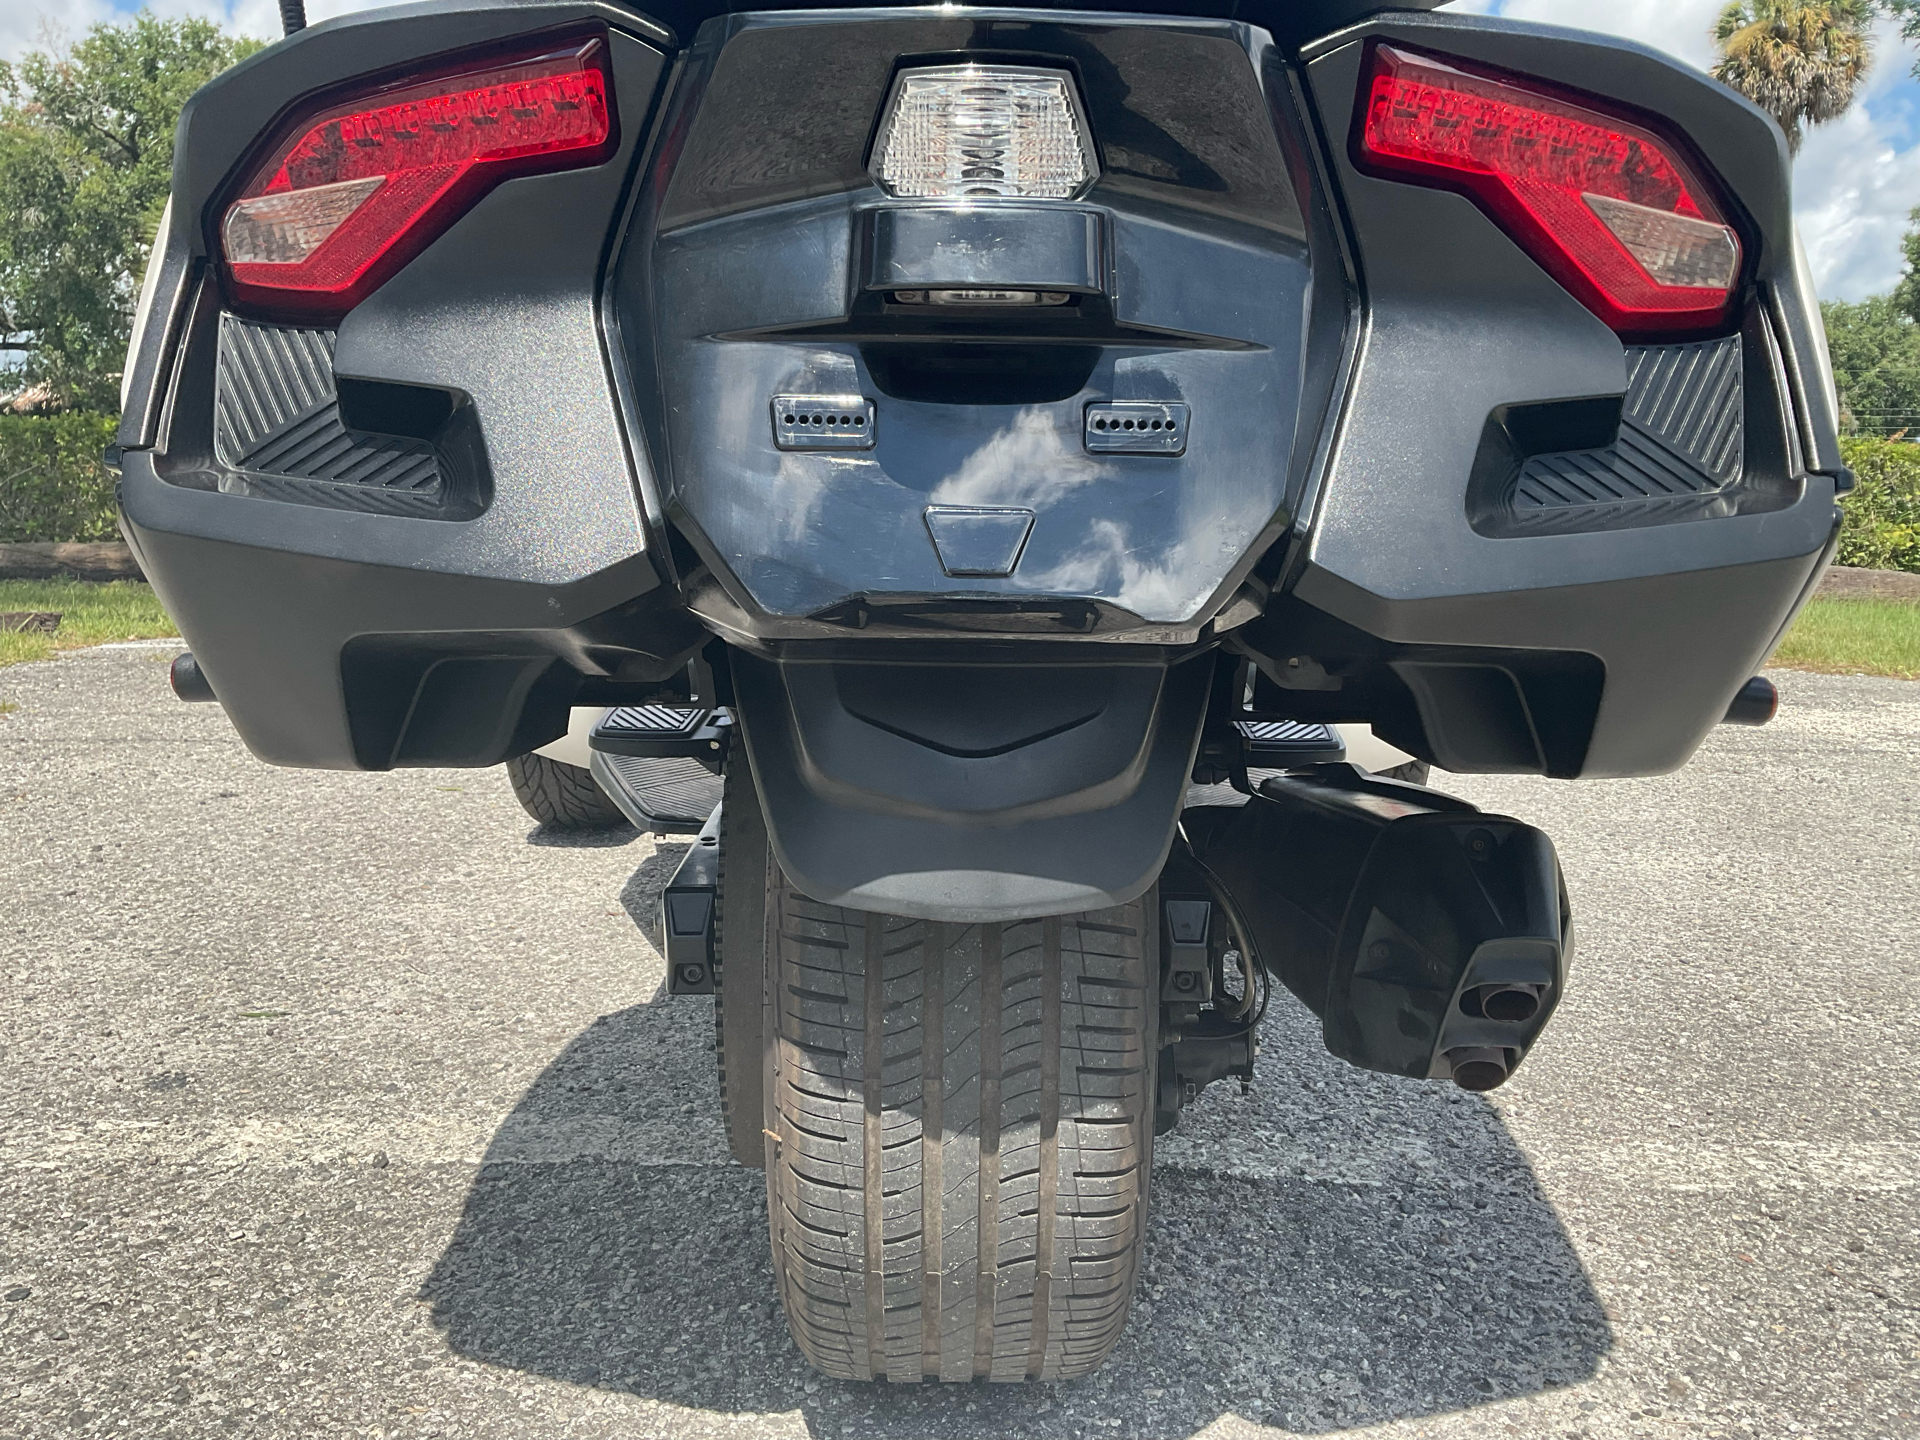 2020 Can-Am Spyder RT Limited in Sanford, Florida - Photo 23